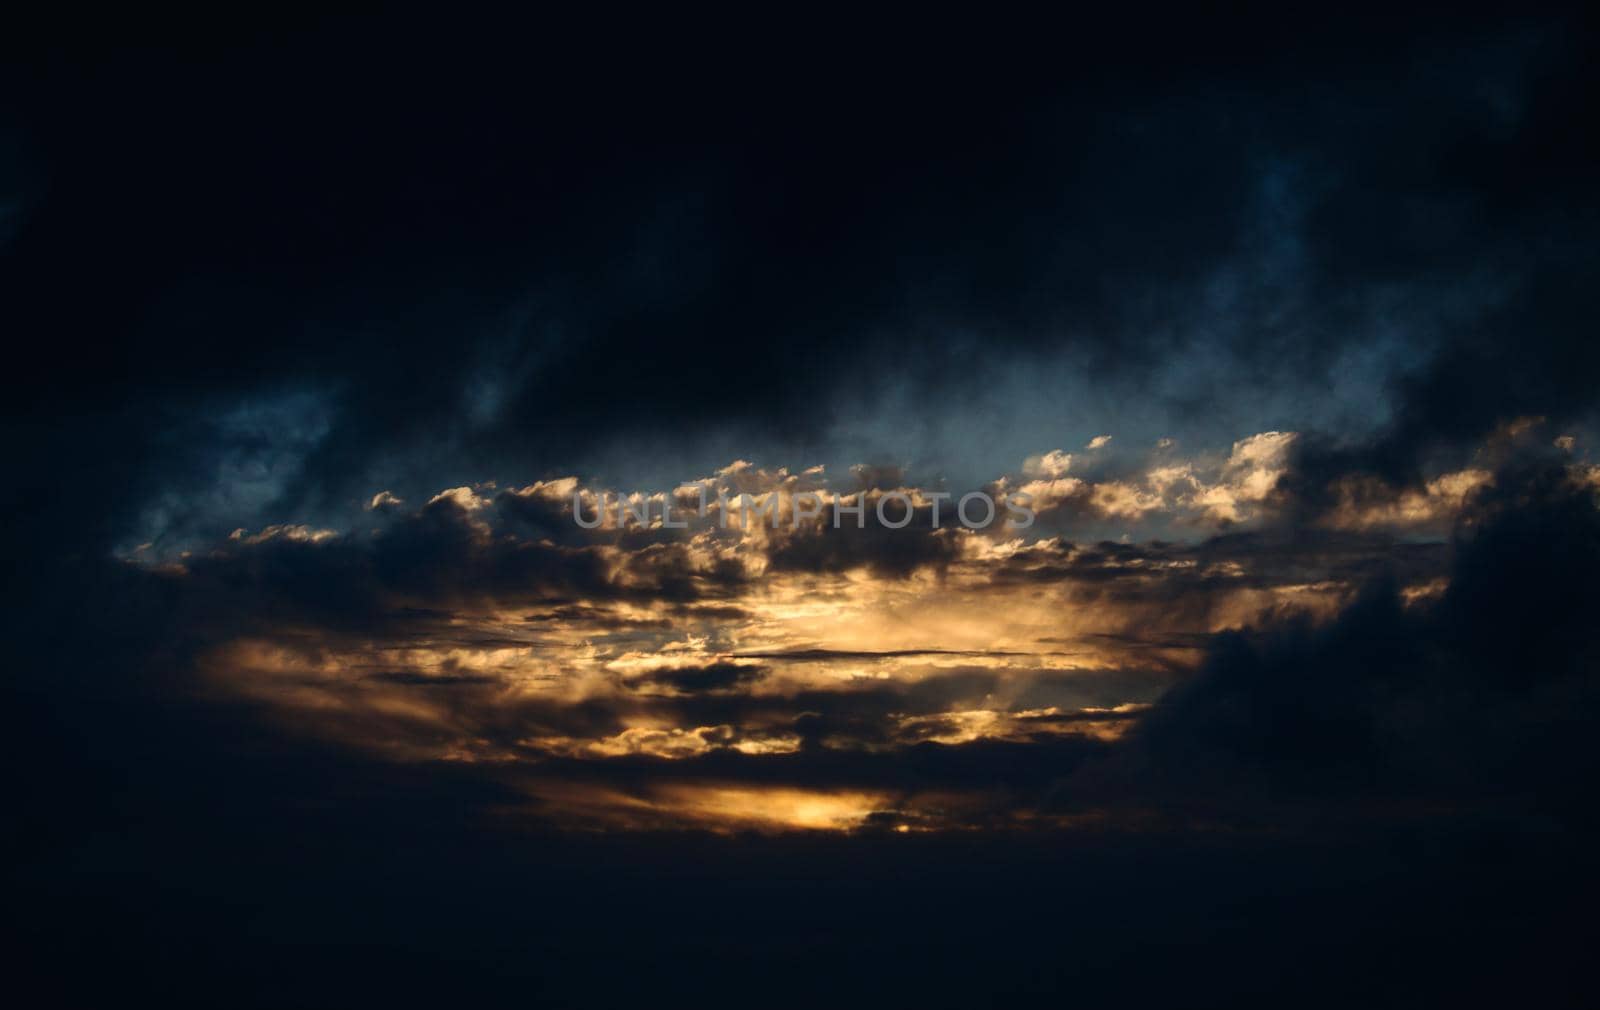 Dramatic dark evening sky landscape with moody clouds and golden sunlight by tennesseewitney